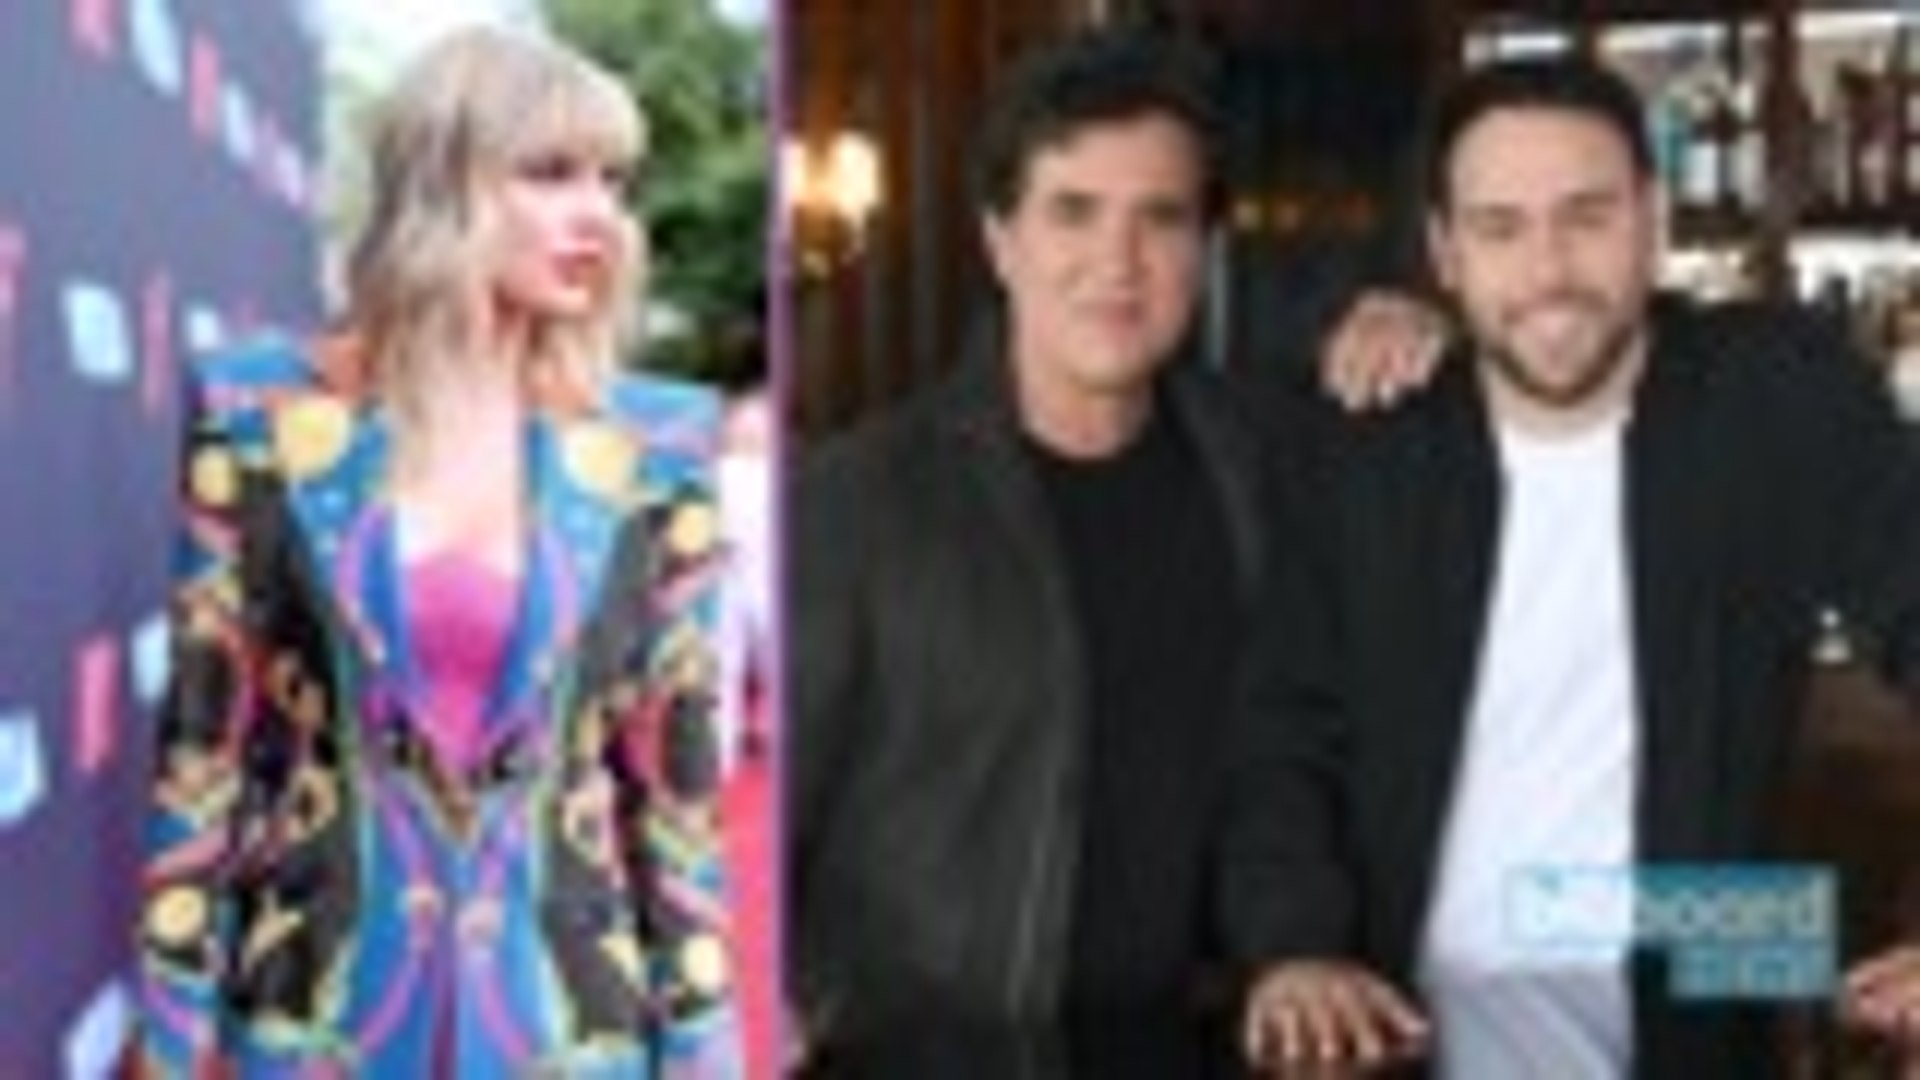 A Deep Dive Into the Drama Between Taylor Swift, Scooter Braun & Scott Borchetta Over Music Righ